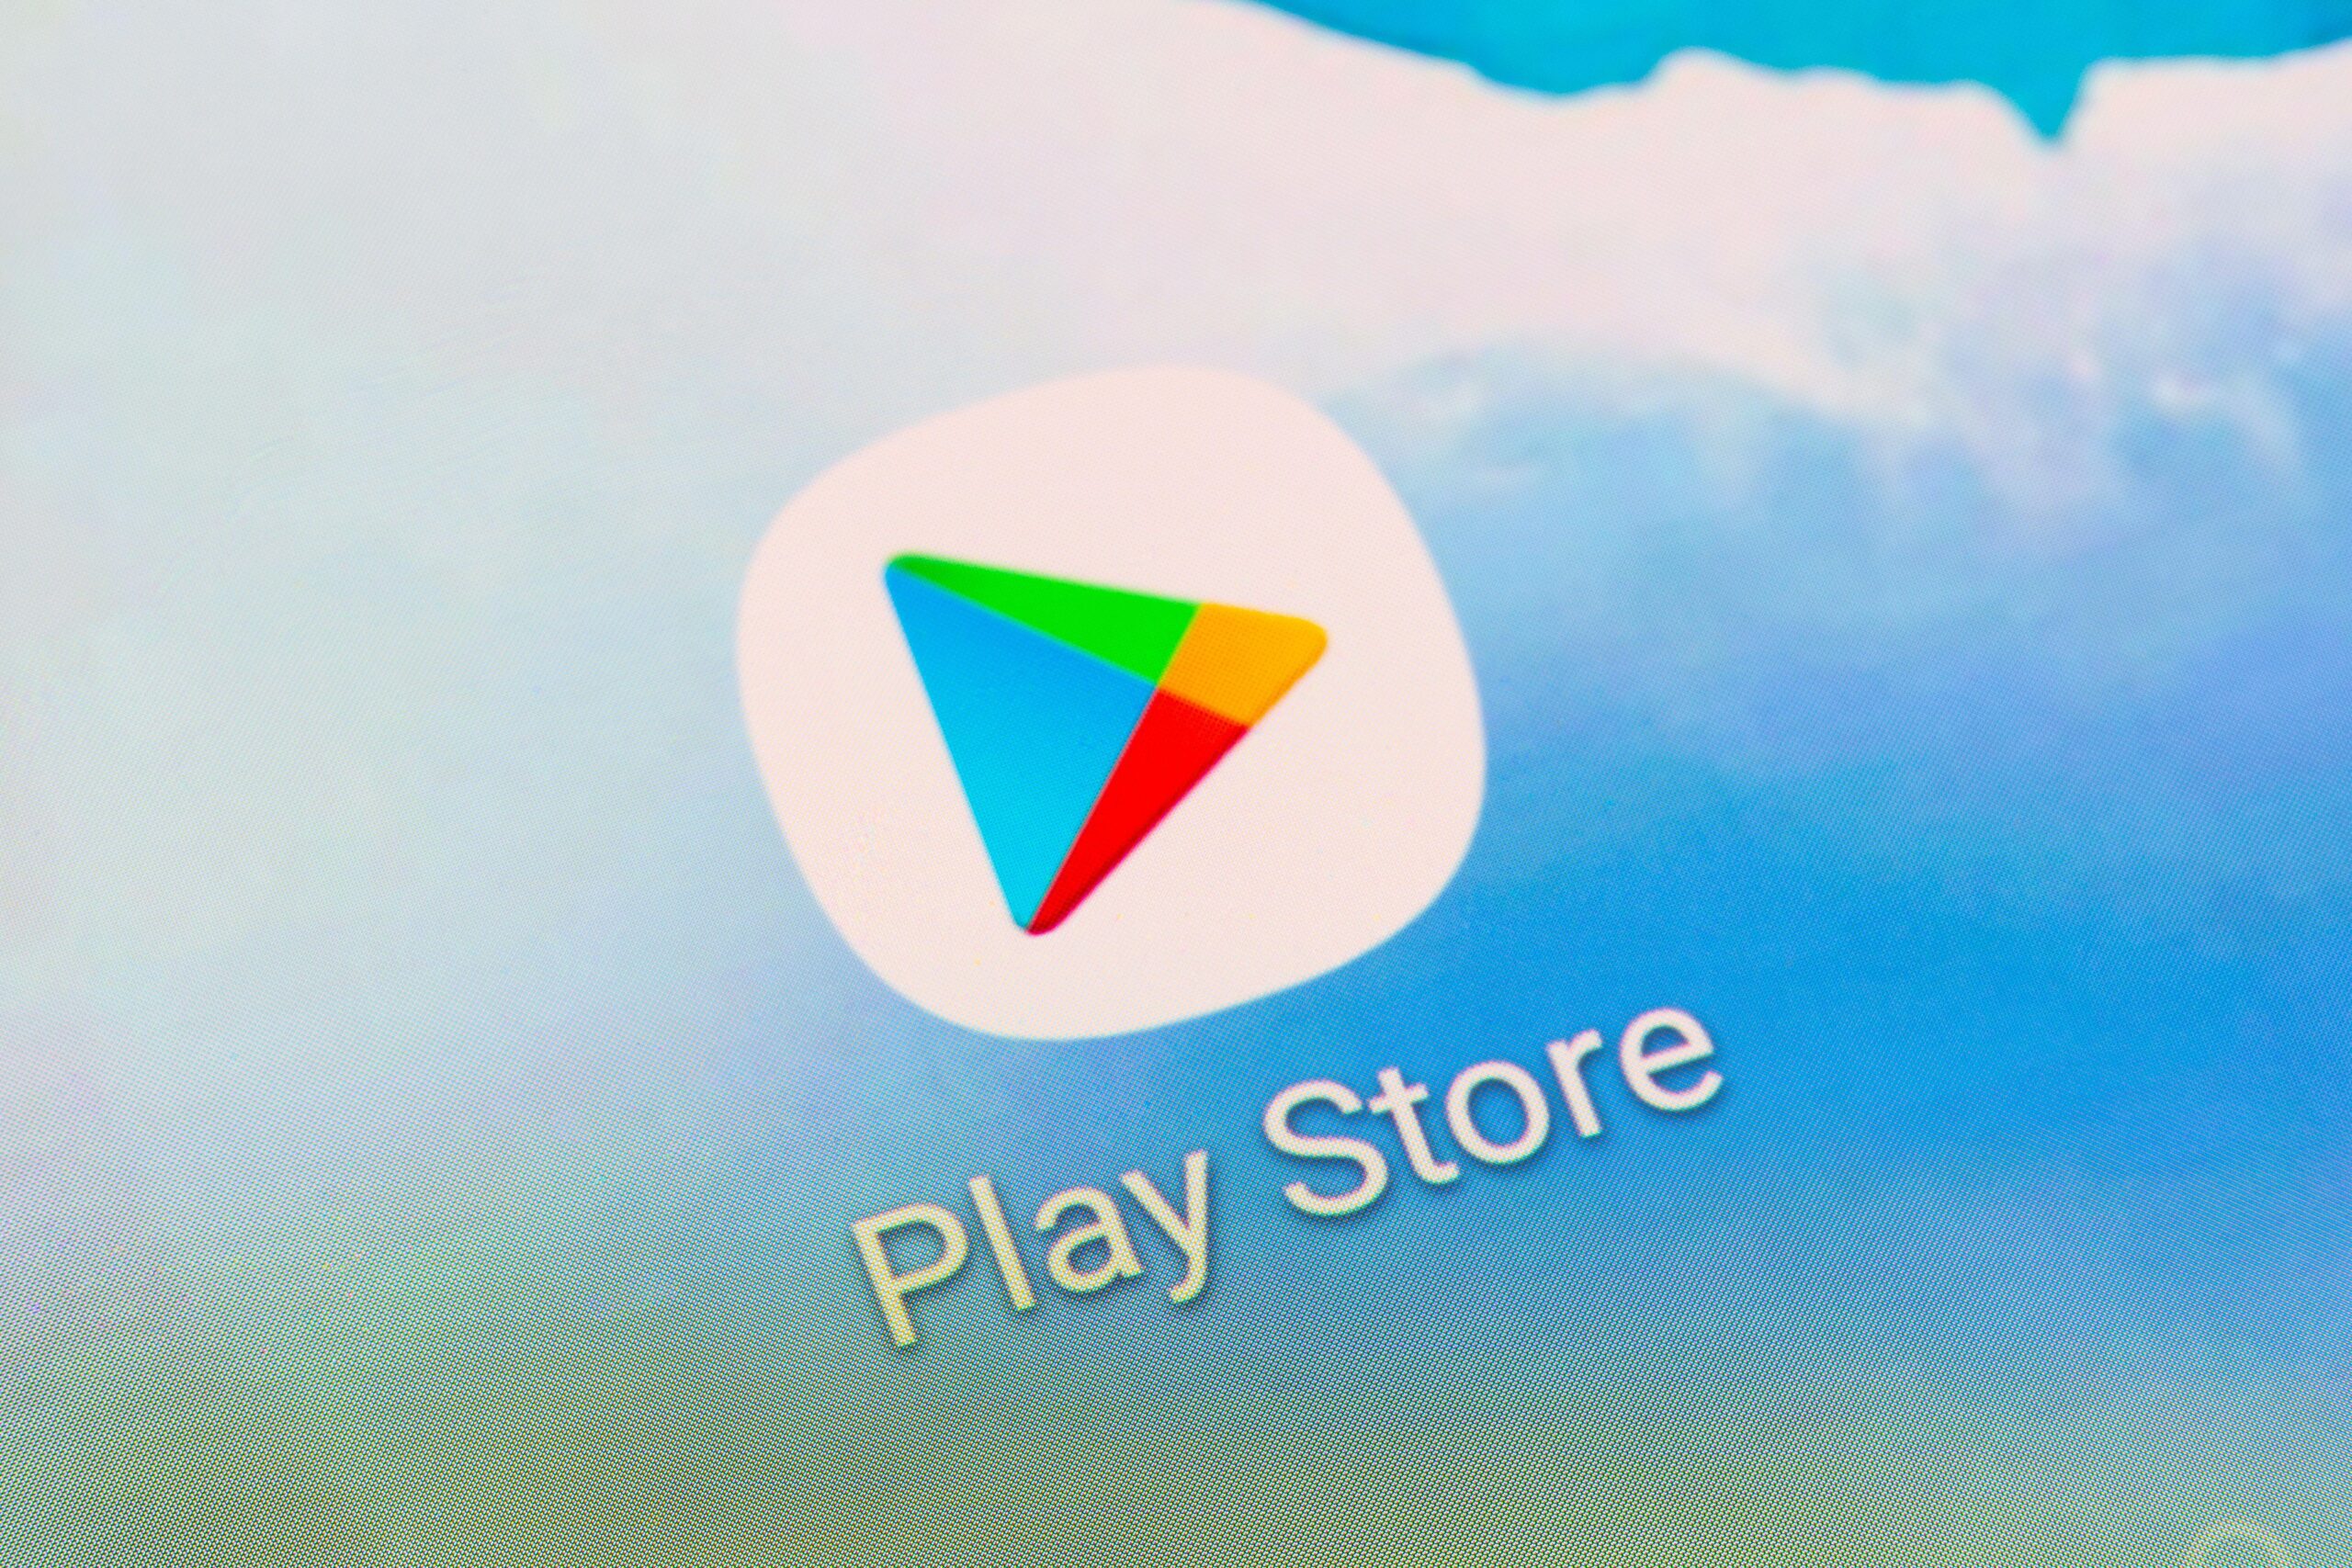 Spyware Gamed 1.5M Users of Google Play Store – Source: www.darkreading.com